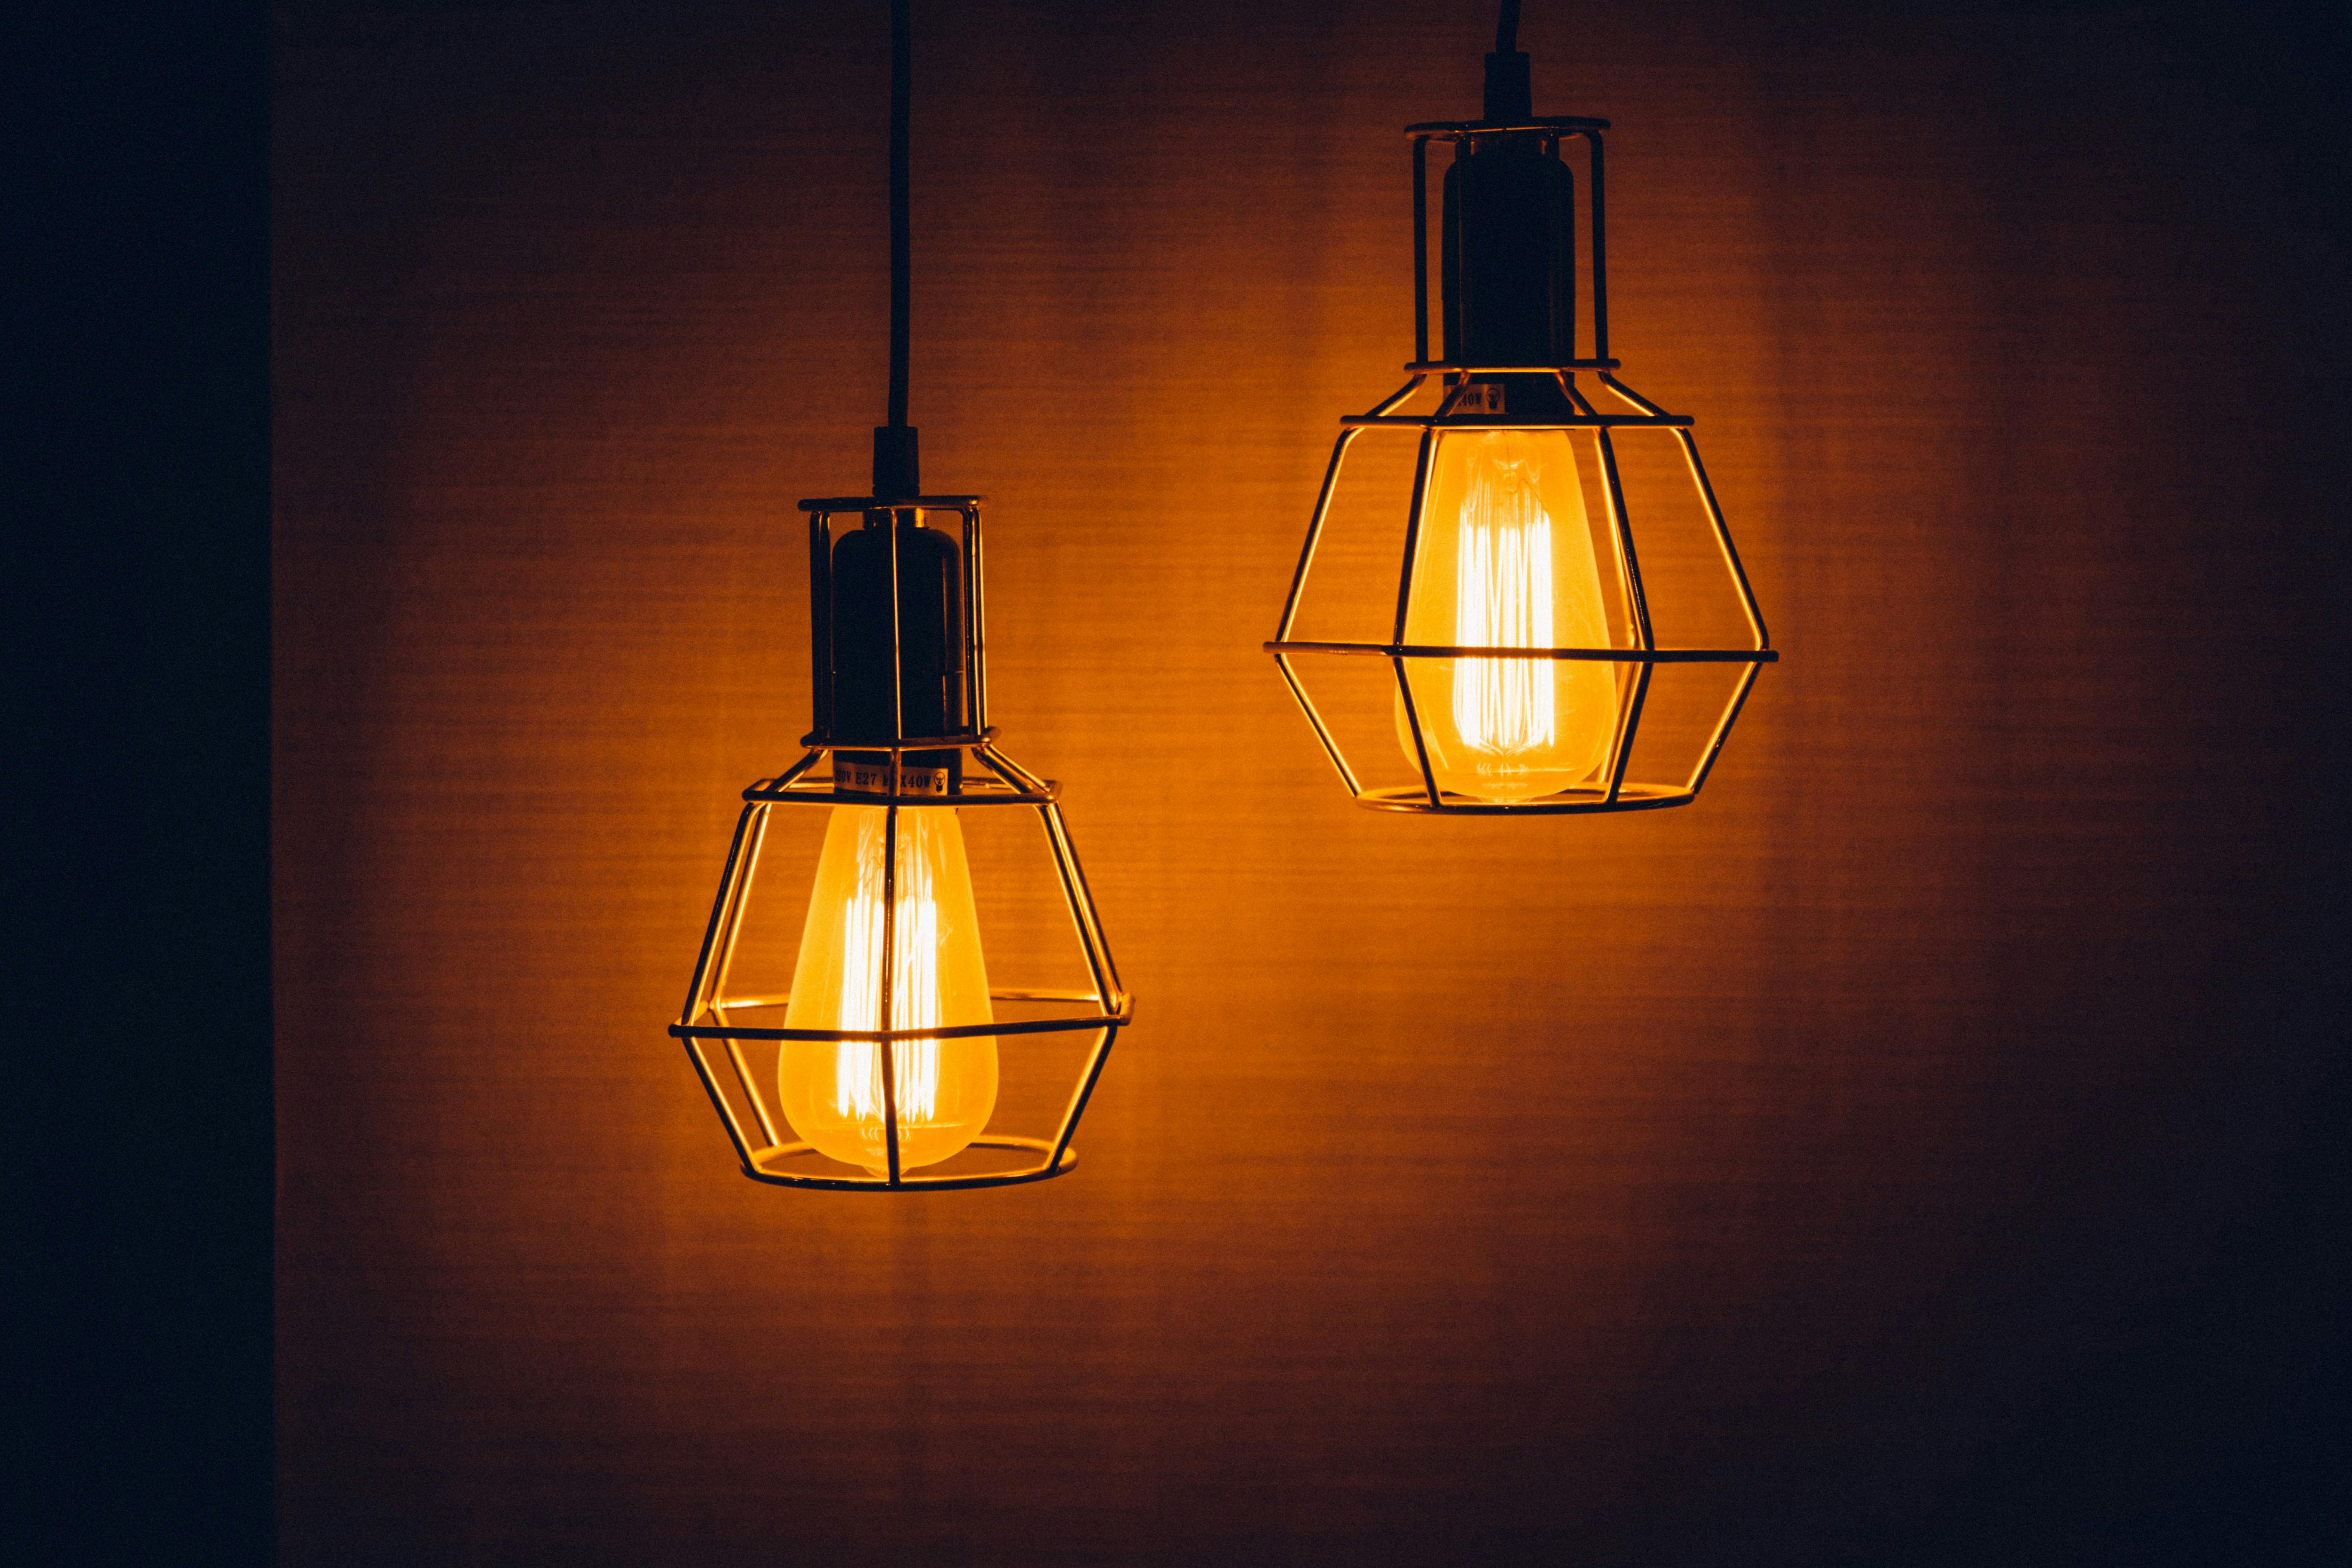 Lights Photos, Download The BEST Free Lights Stock Photos & HD Images